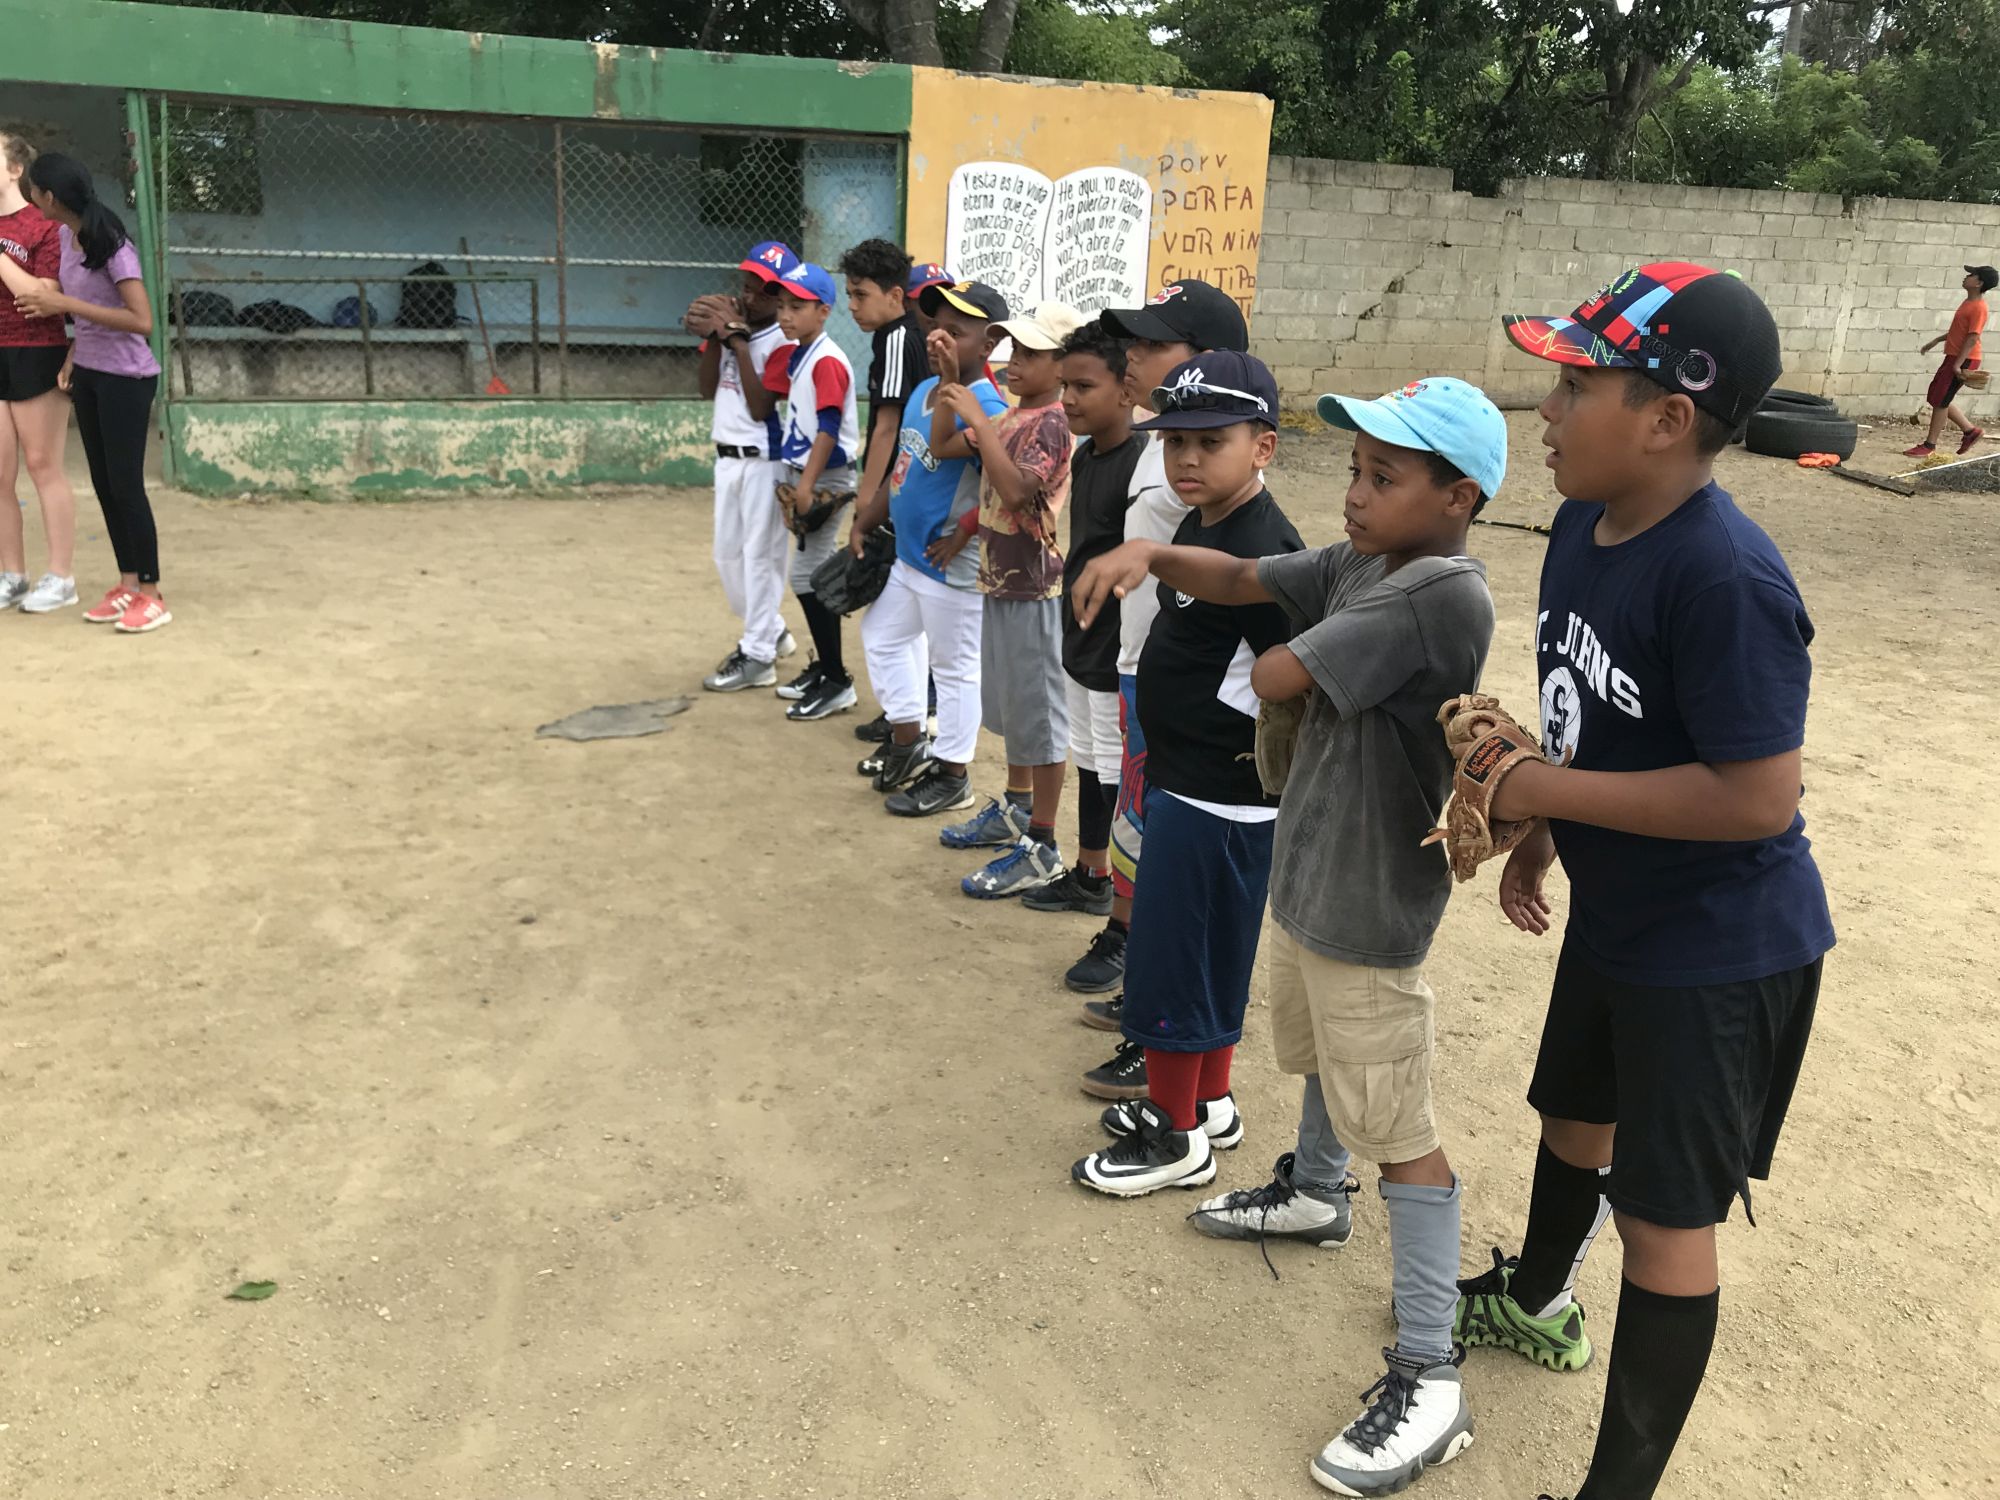 The Dominican Republic Sends More Players To MLB Than Any Country